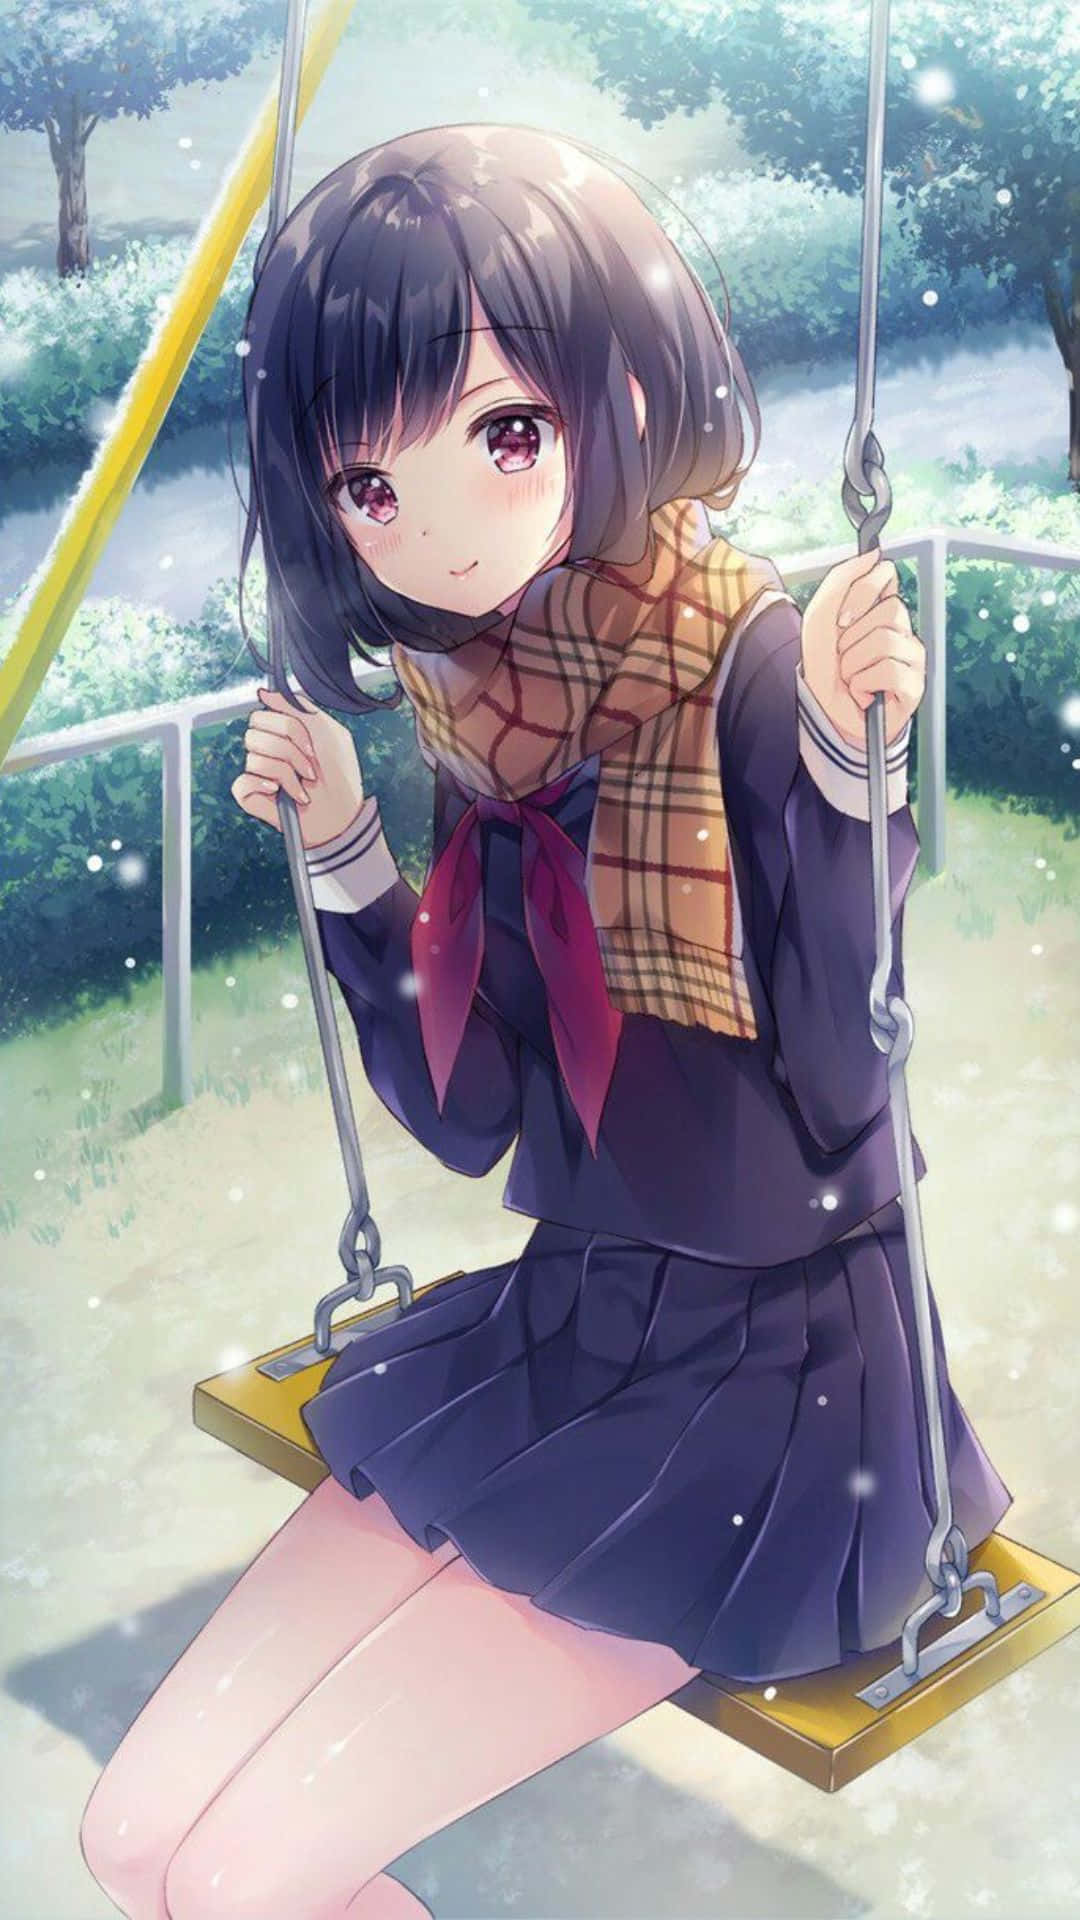 Pretty Anime Girl On A Swing Background